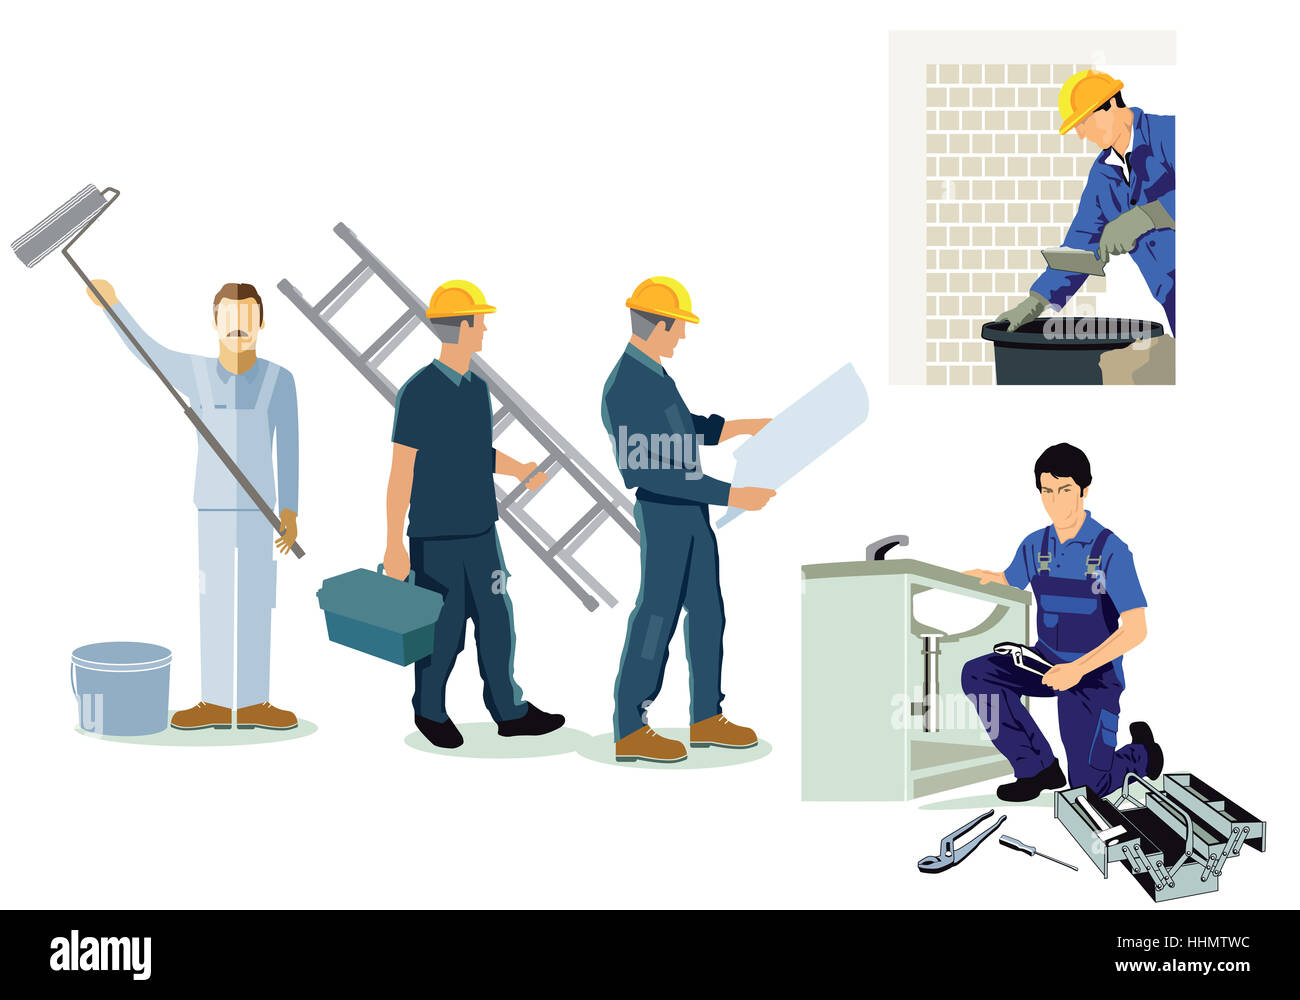 Craftsman, installer, plumber and architect Stock Photo